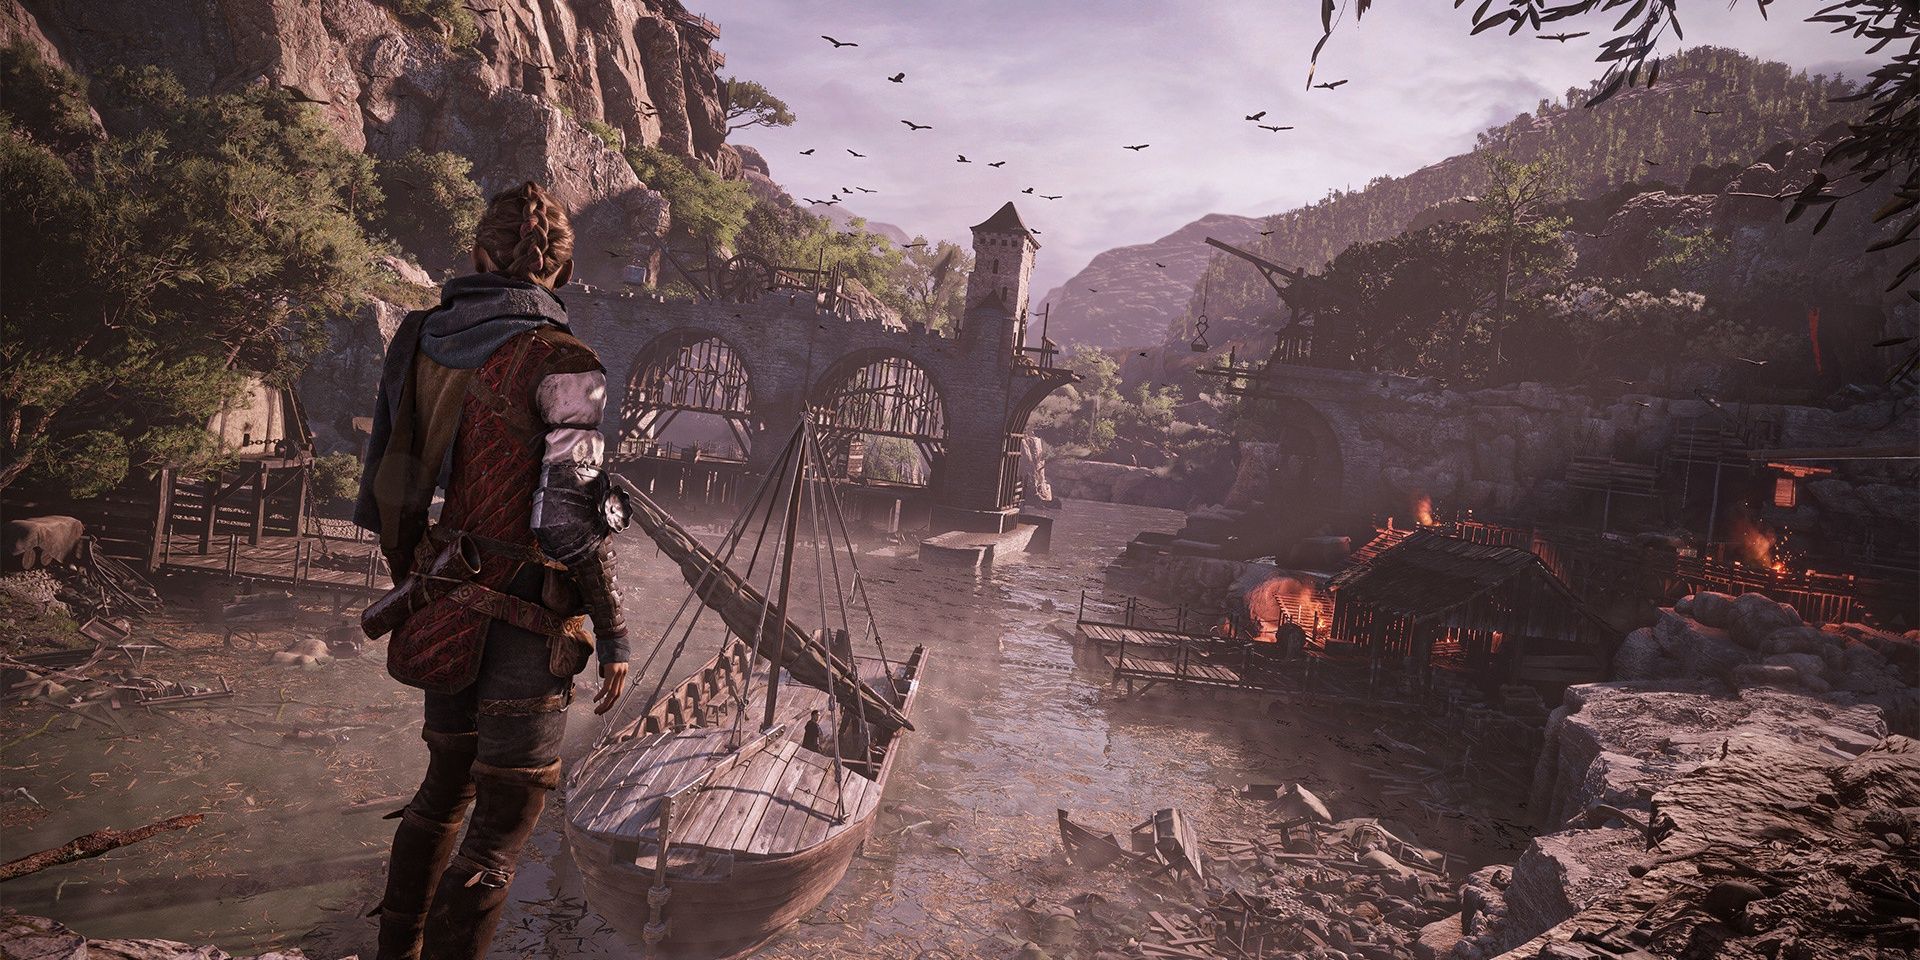 The protagonist overlooking a burning port, a bridge, and a boat.